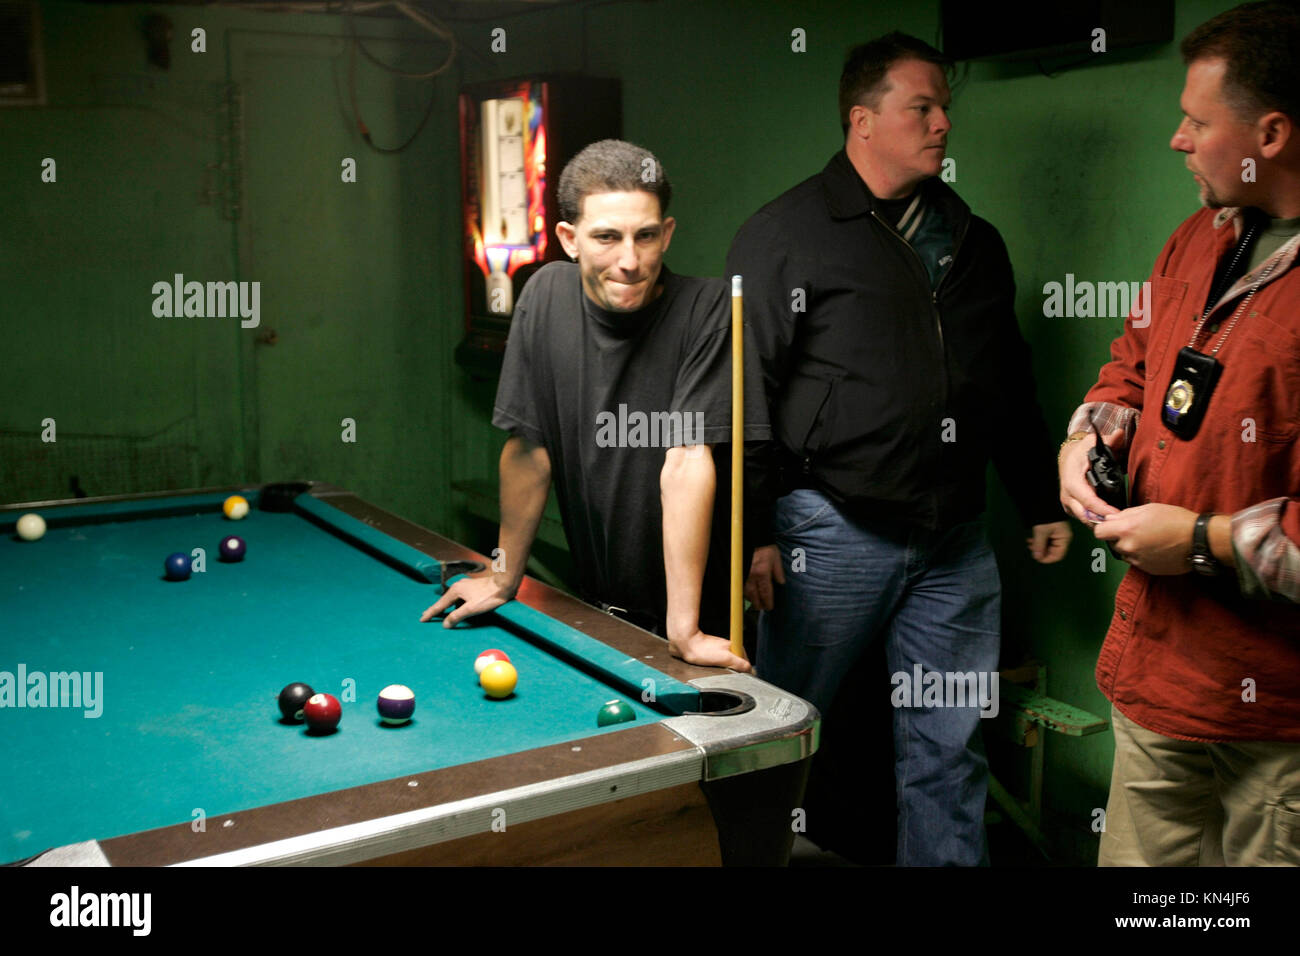 Suffolk County Police officers from the anti-gang unit check identity papers of possible gang members of Mara Salvatrucha 13 or MS-13 in a pool hall in Brentwood, New York. Many of the MS-13 members are in the U.S. illegally with false documents. Stock Photo